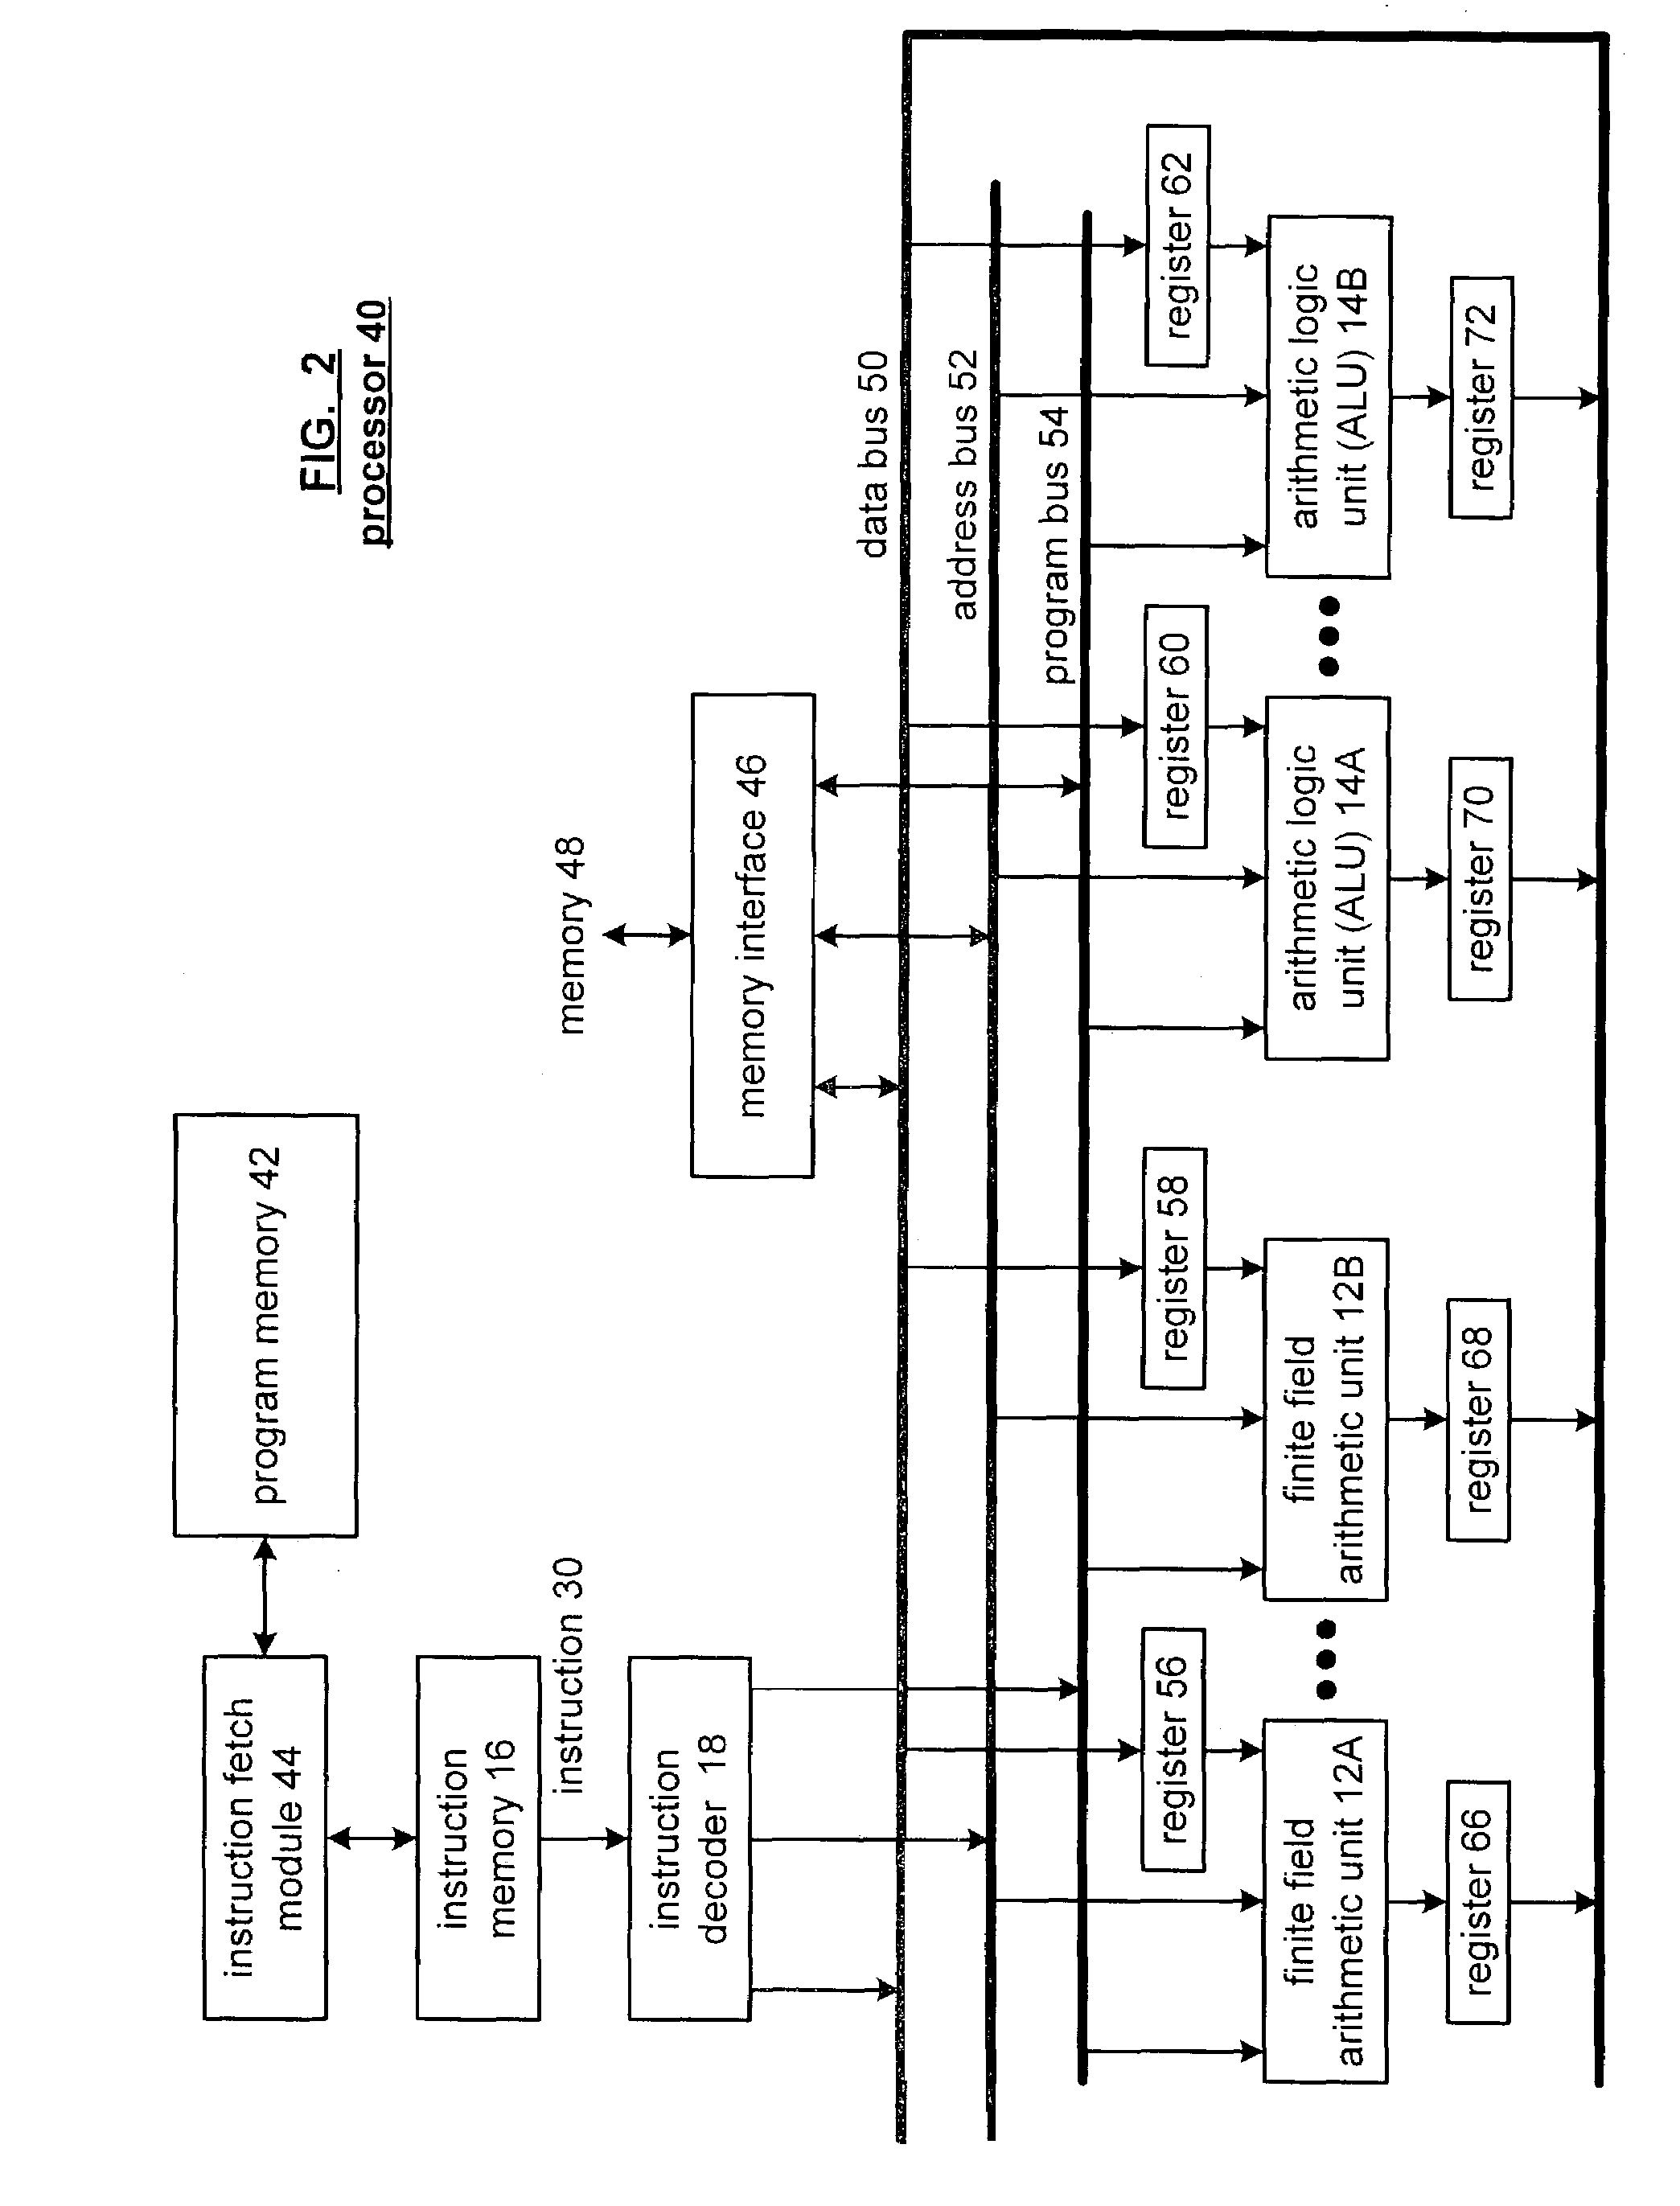 Processor having a finite field arithmetic unit utilizing an array of multipliers and adders